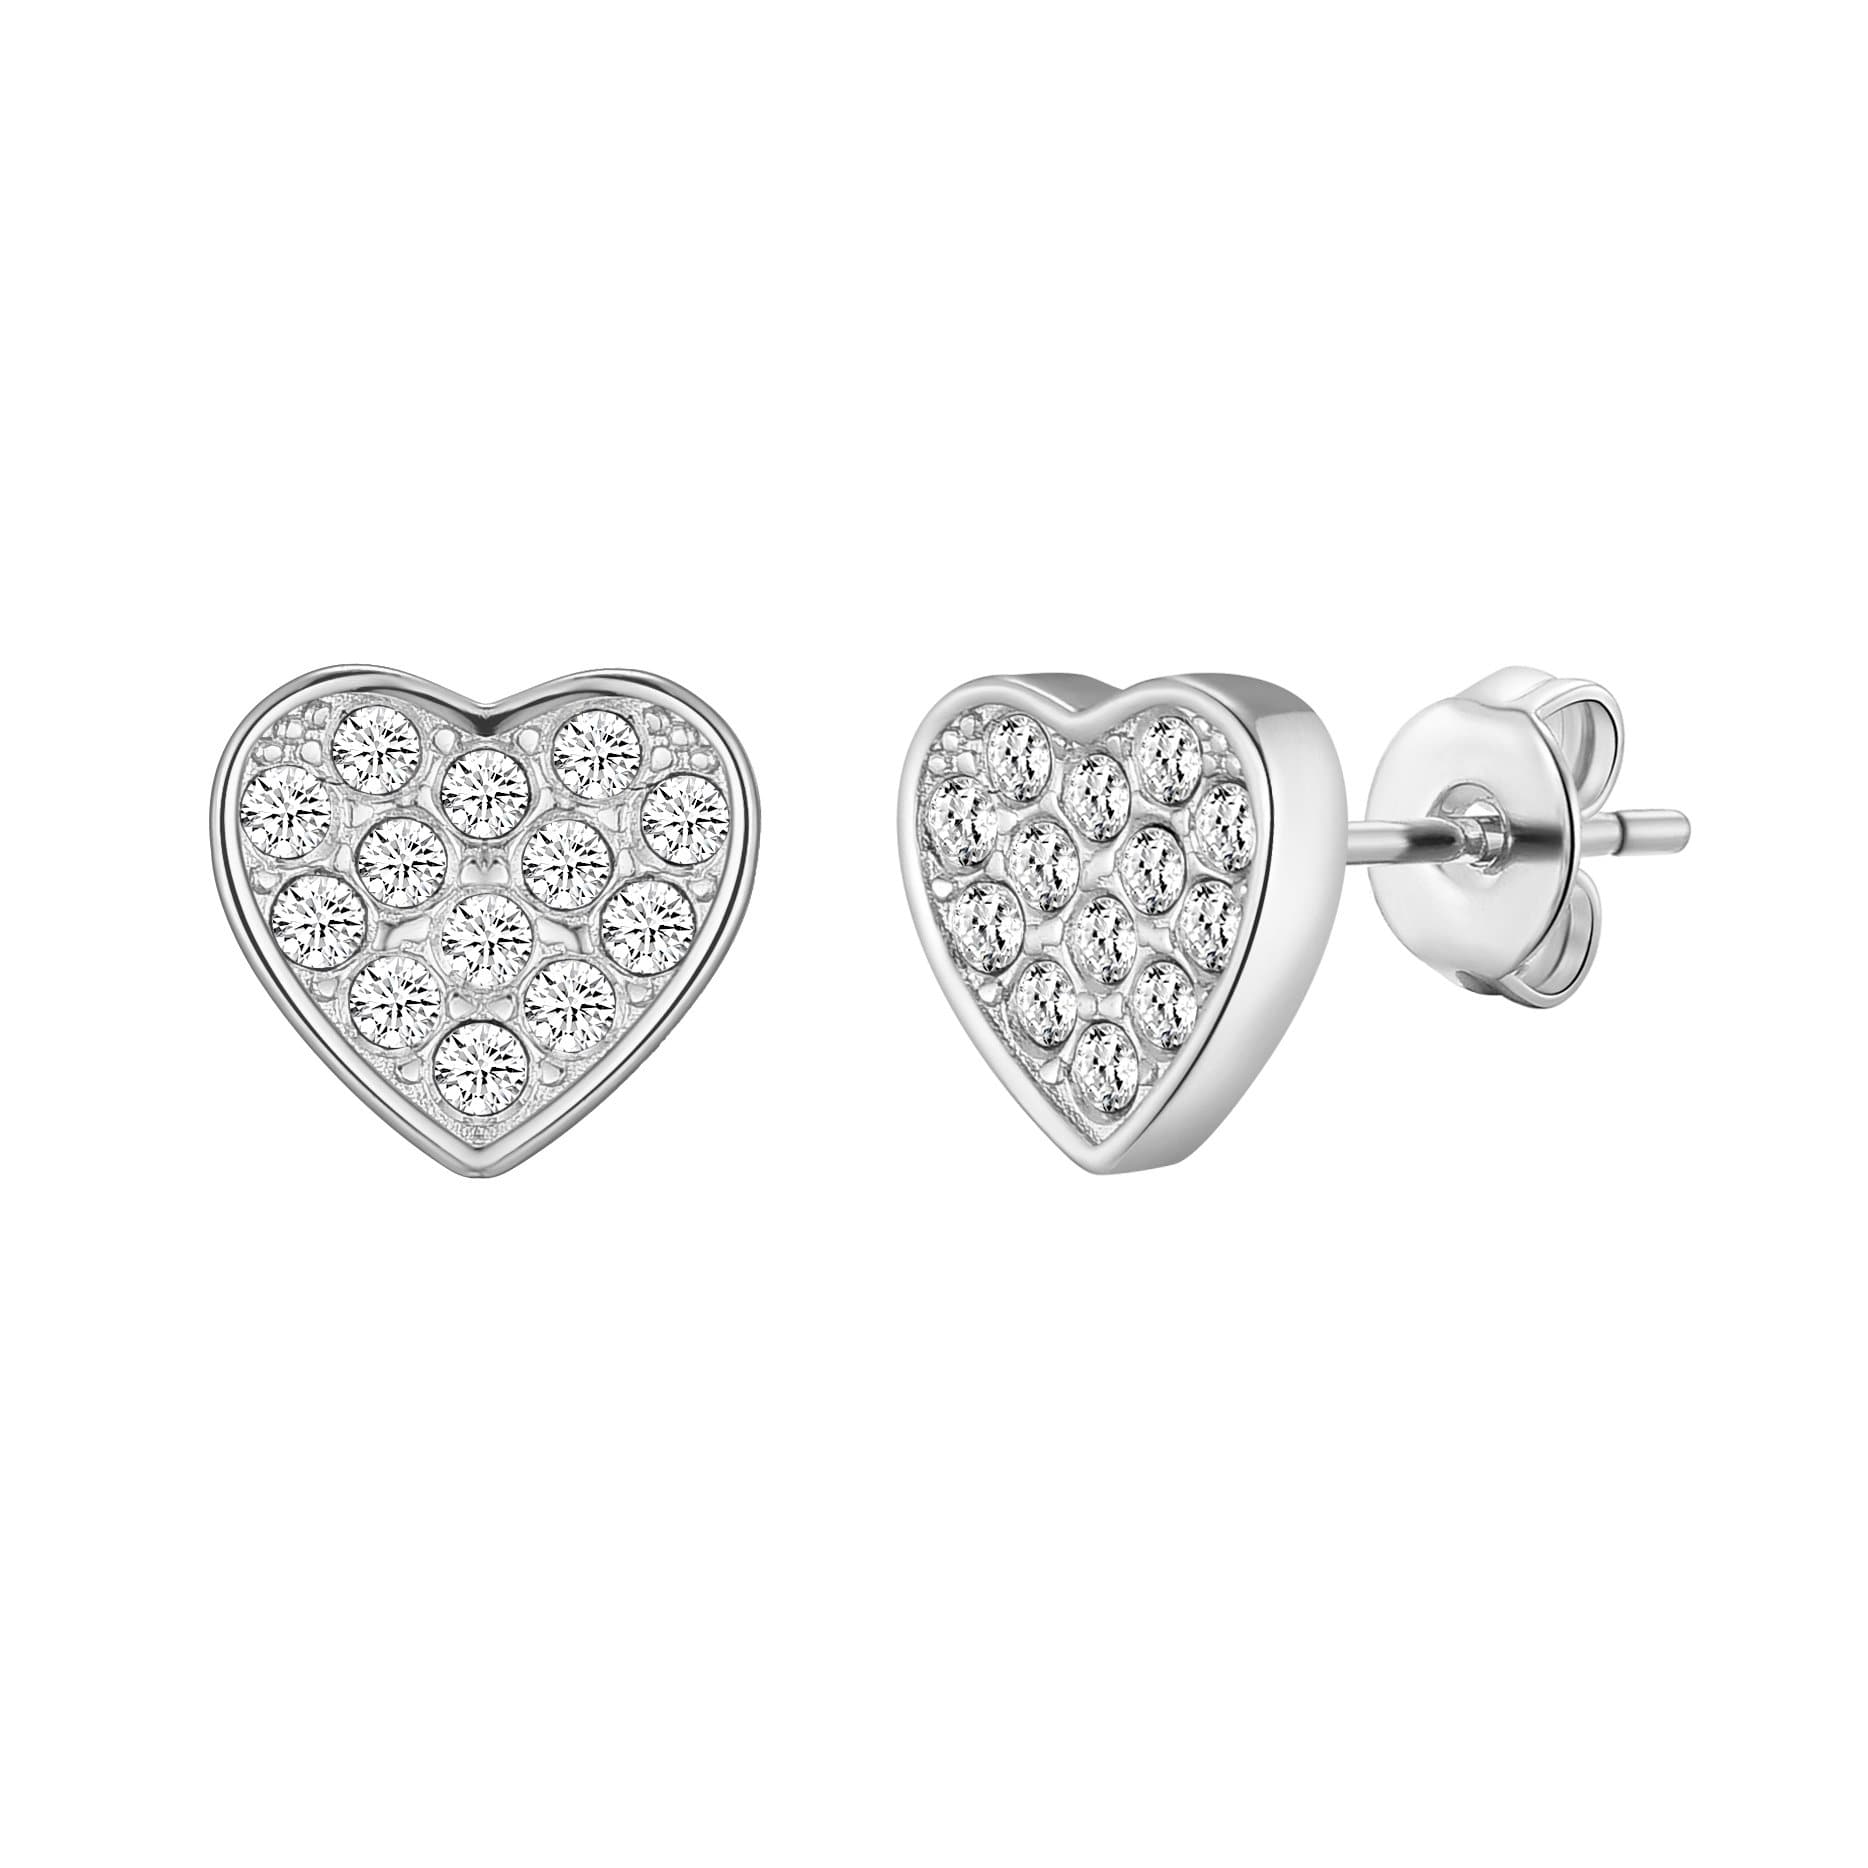 Silver Plated Pave Heart Earrings Created with Zircondia® Crystals by Philip Jones Jewellery